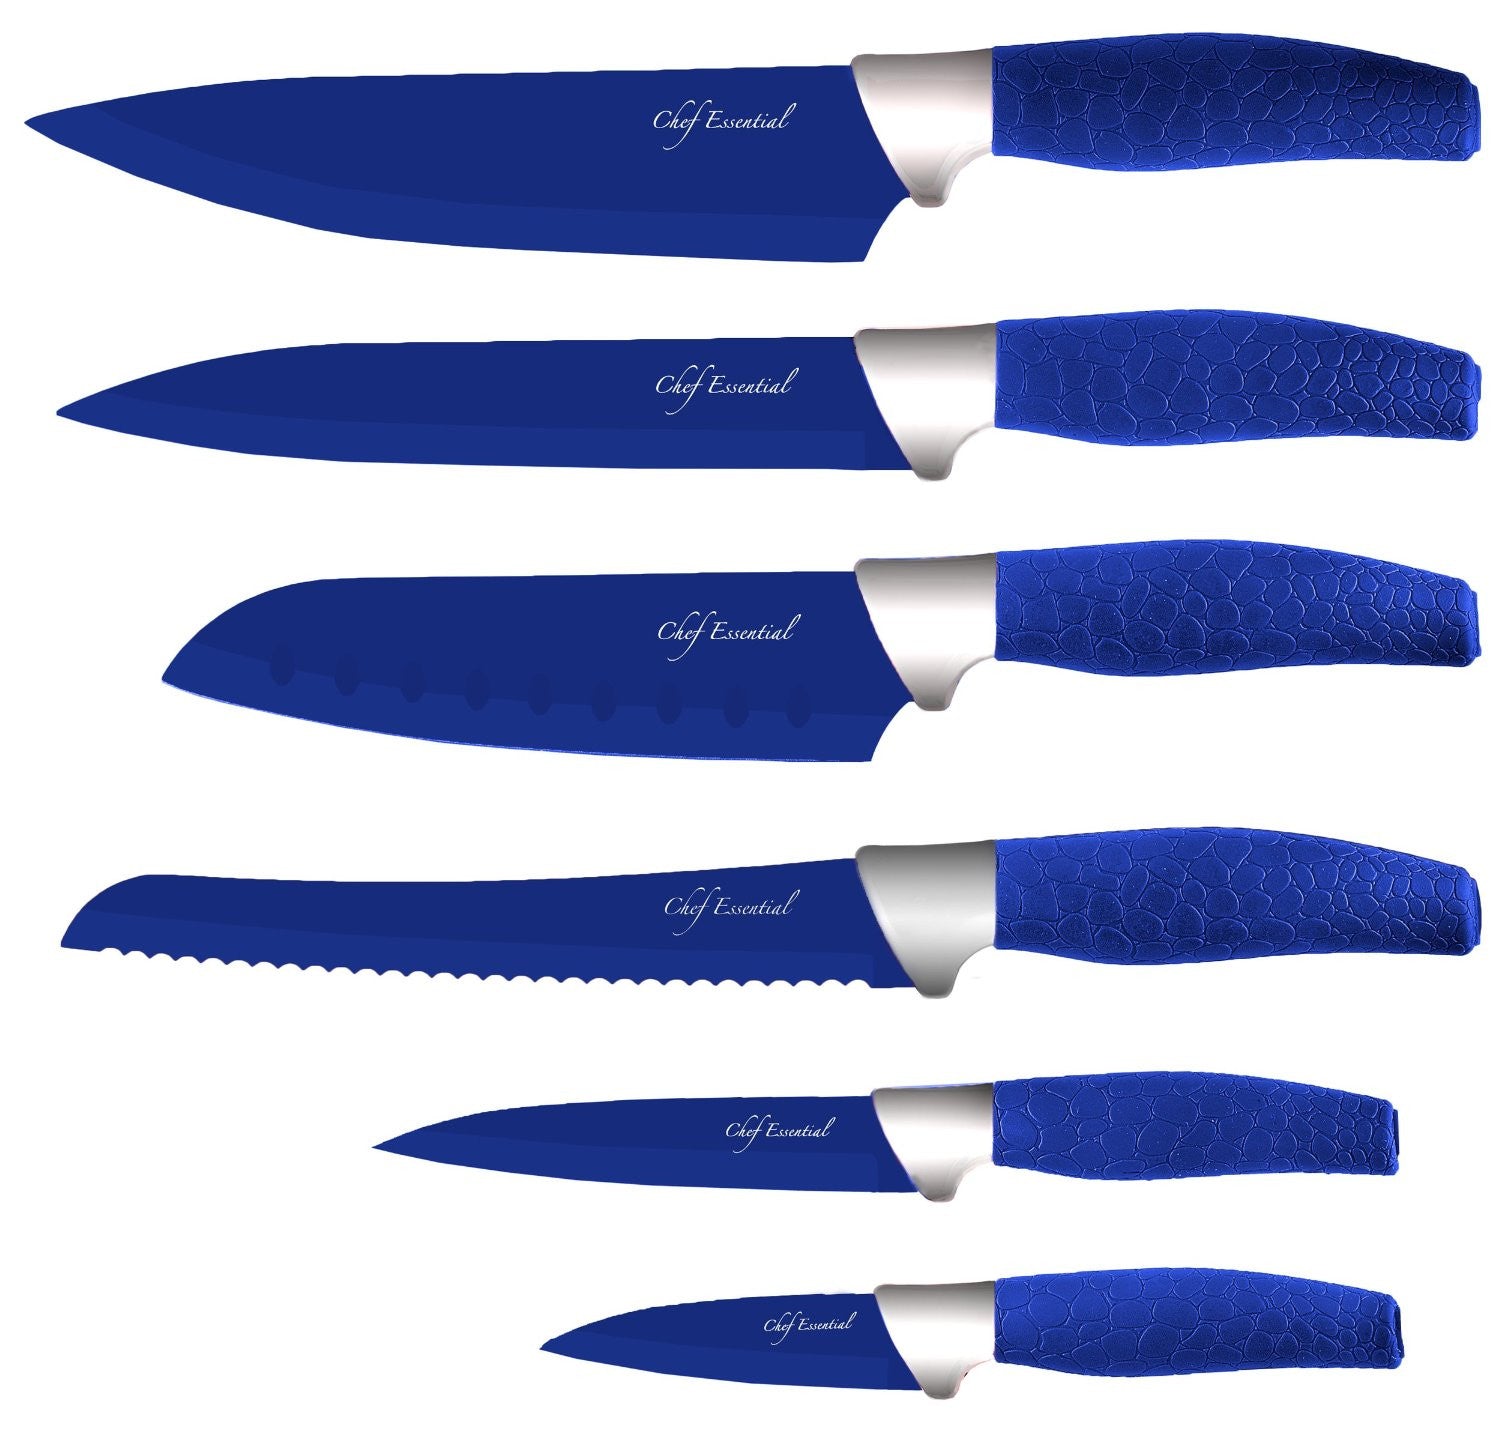 https://chefessentialproducts.com/cdn/shop/products/7_Piece_Knife_Blue2.jpg?v=1458238803